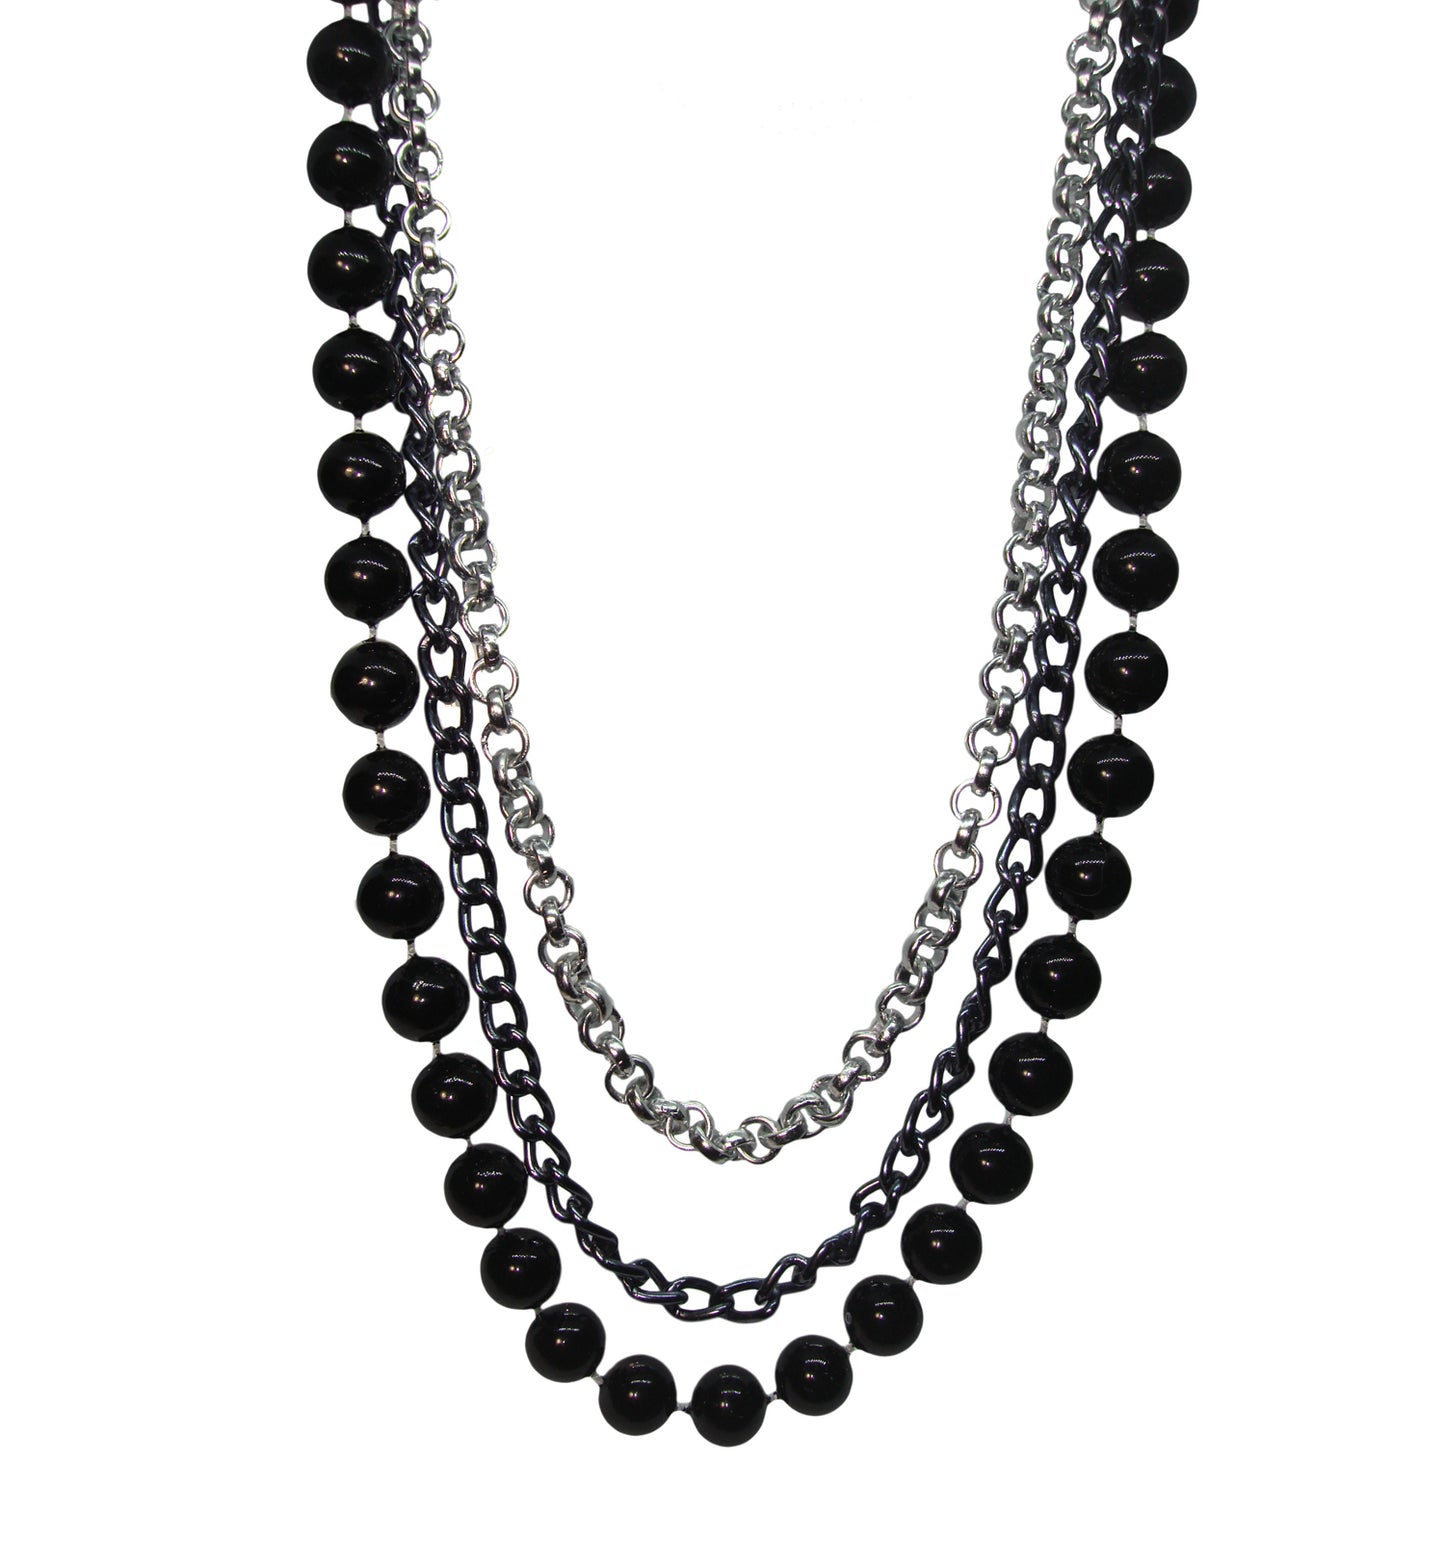 Multi Strand Layered Black Beaded Silver Tone Chain Necklace For Women 32"